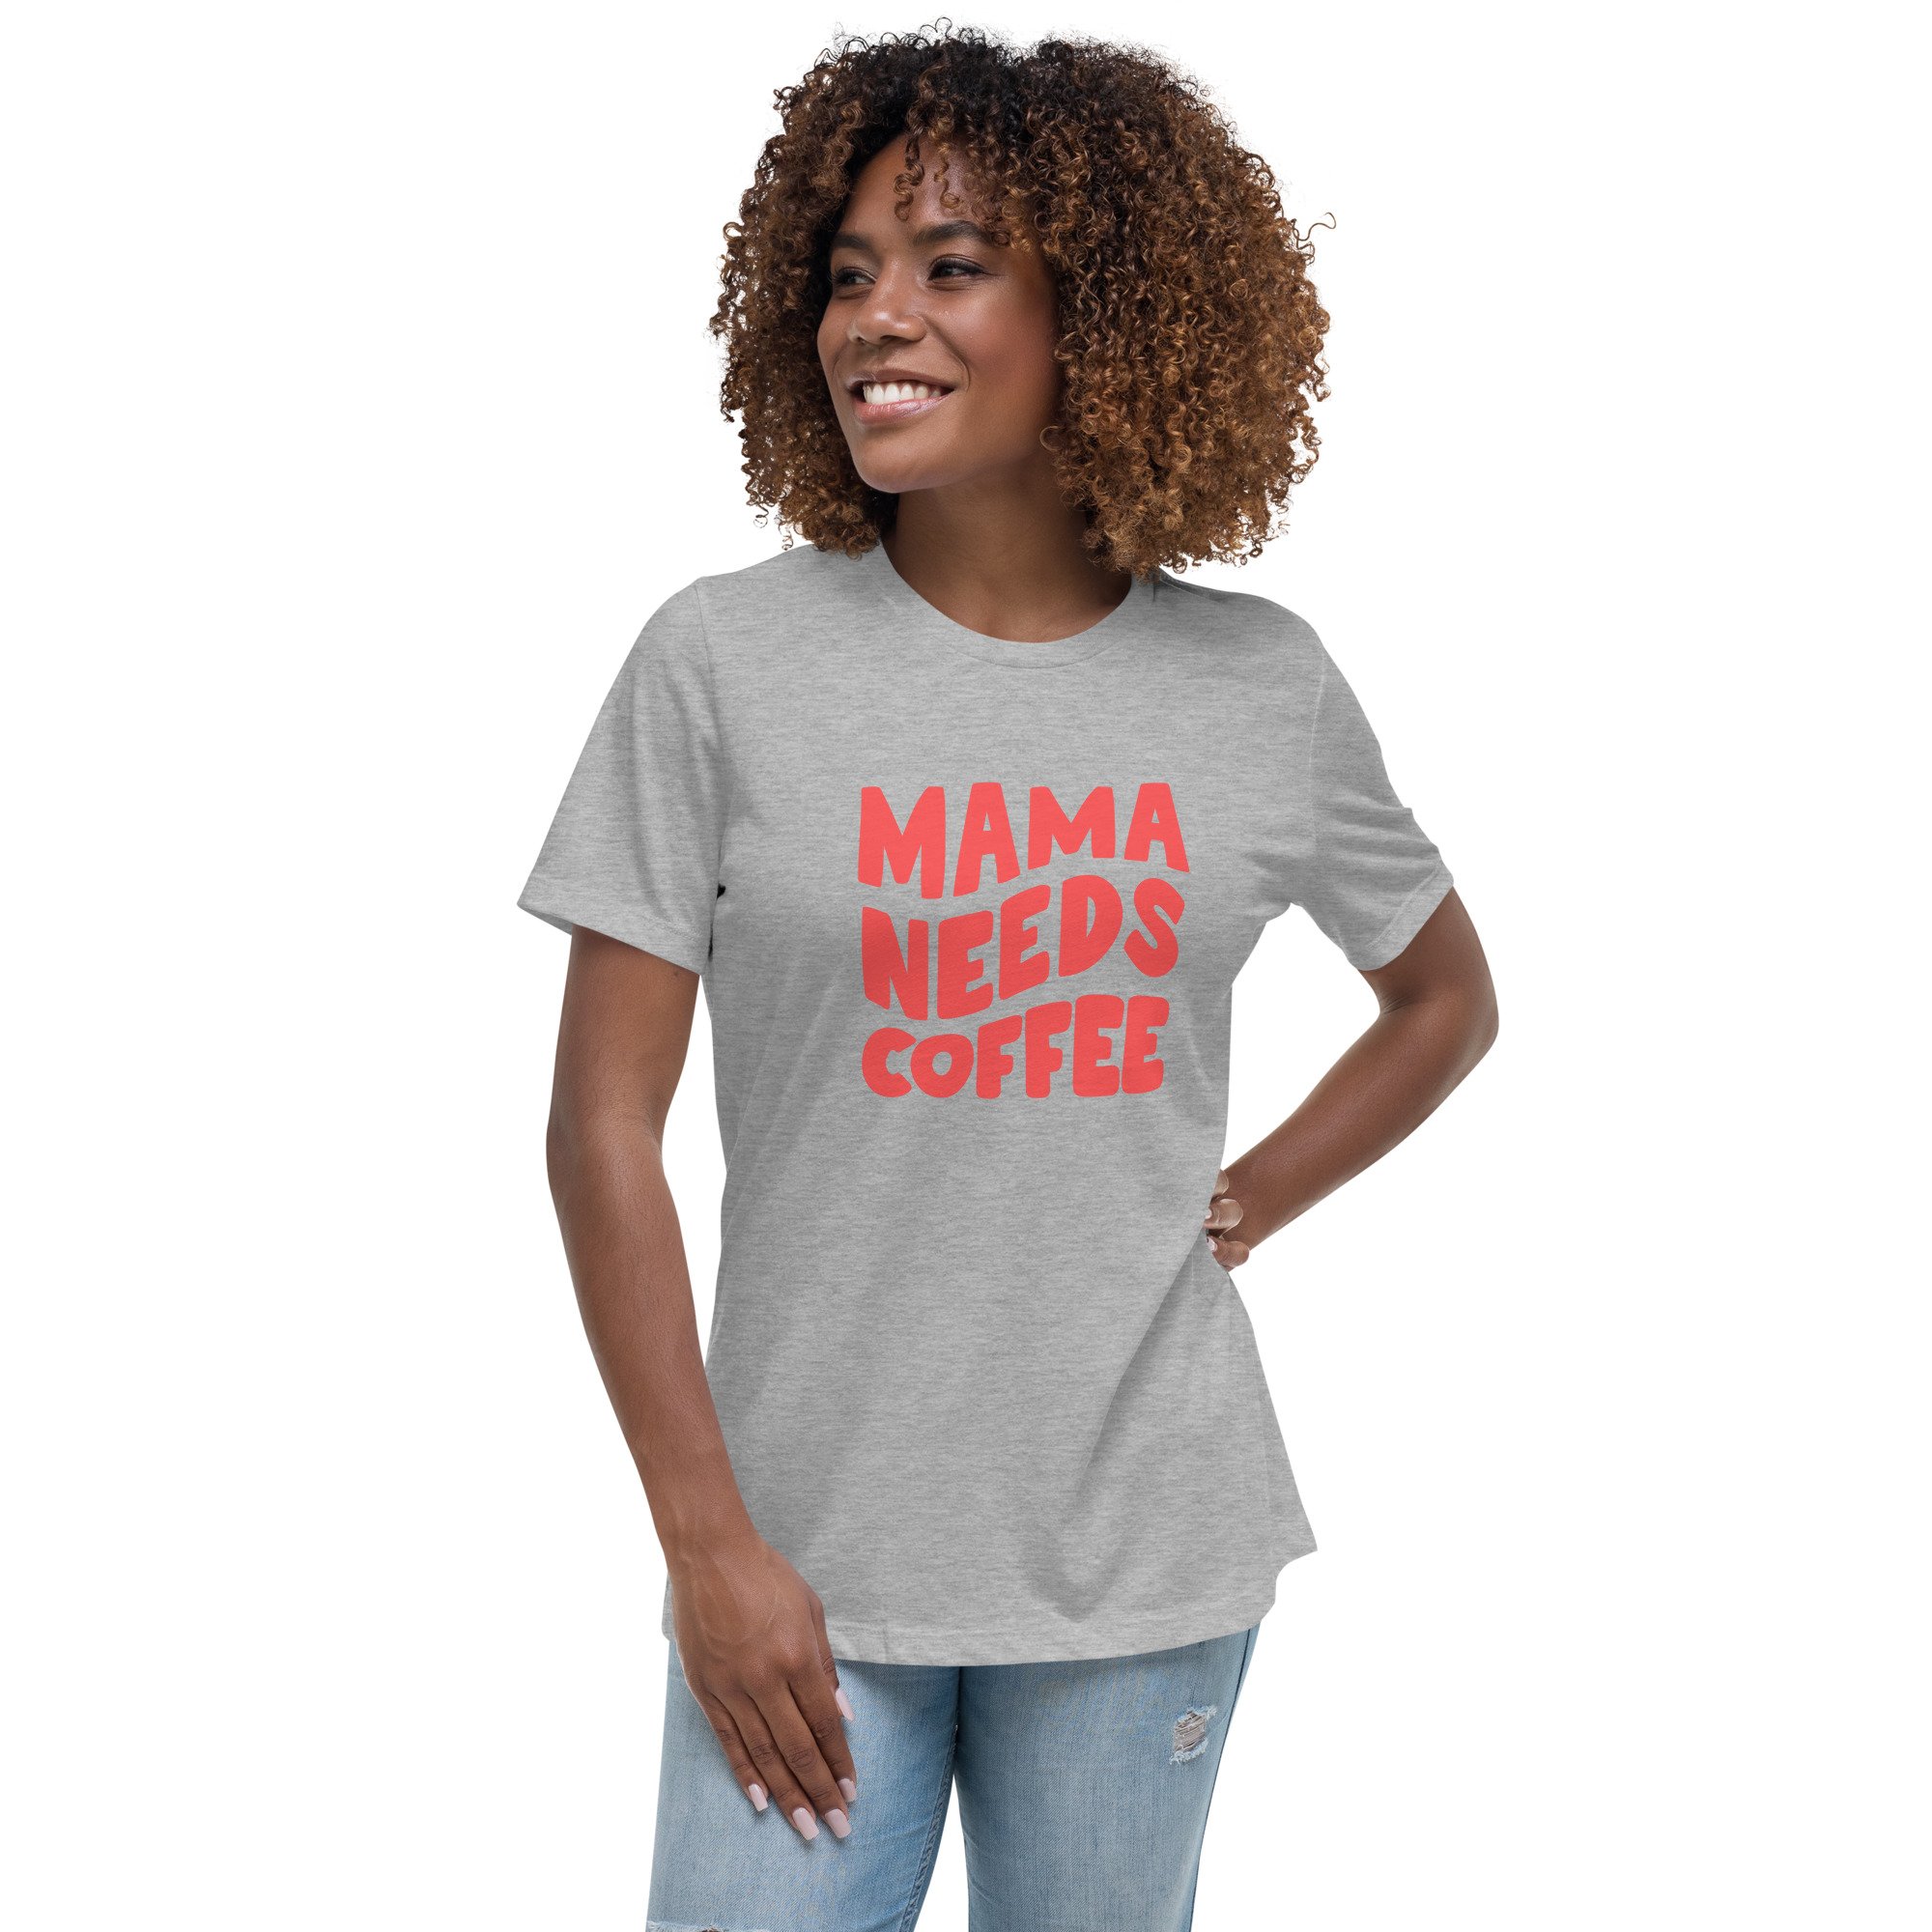 https://images.squarespace-cdn.com/content/v1/624a3afd8ad5ba41fea1364a/1680553217154-Q2AM2WGCWHDWAMEY09UC/womens-relaxed-t-shirt-athletic-heather-front-642b34f89fabe.jpg